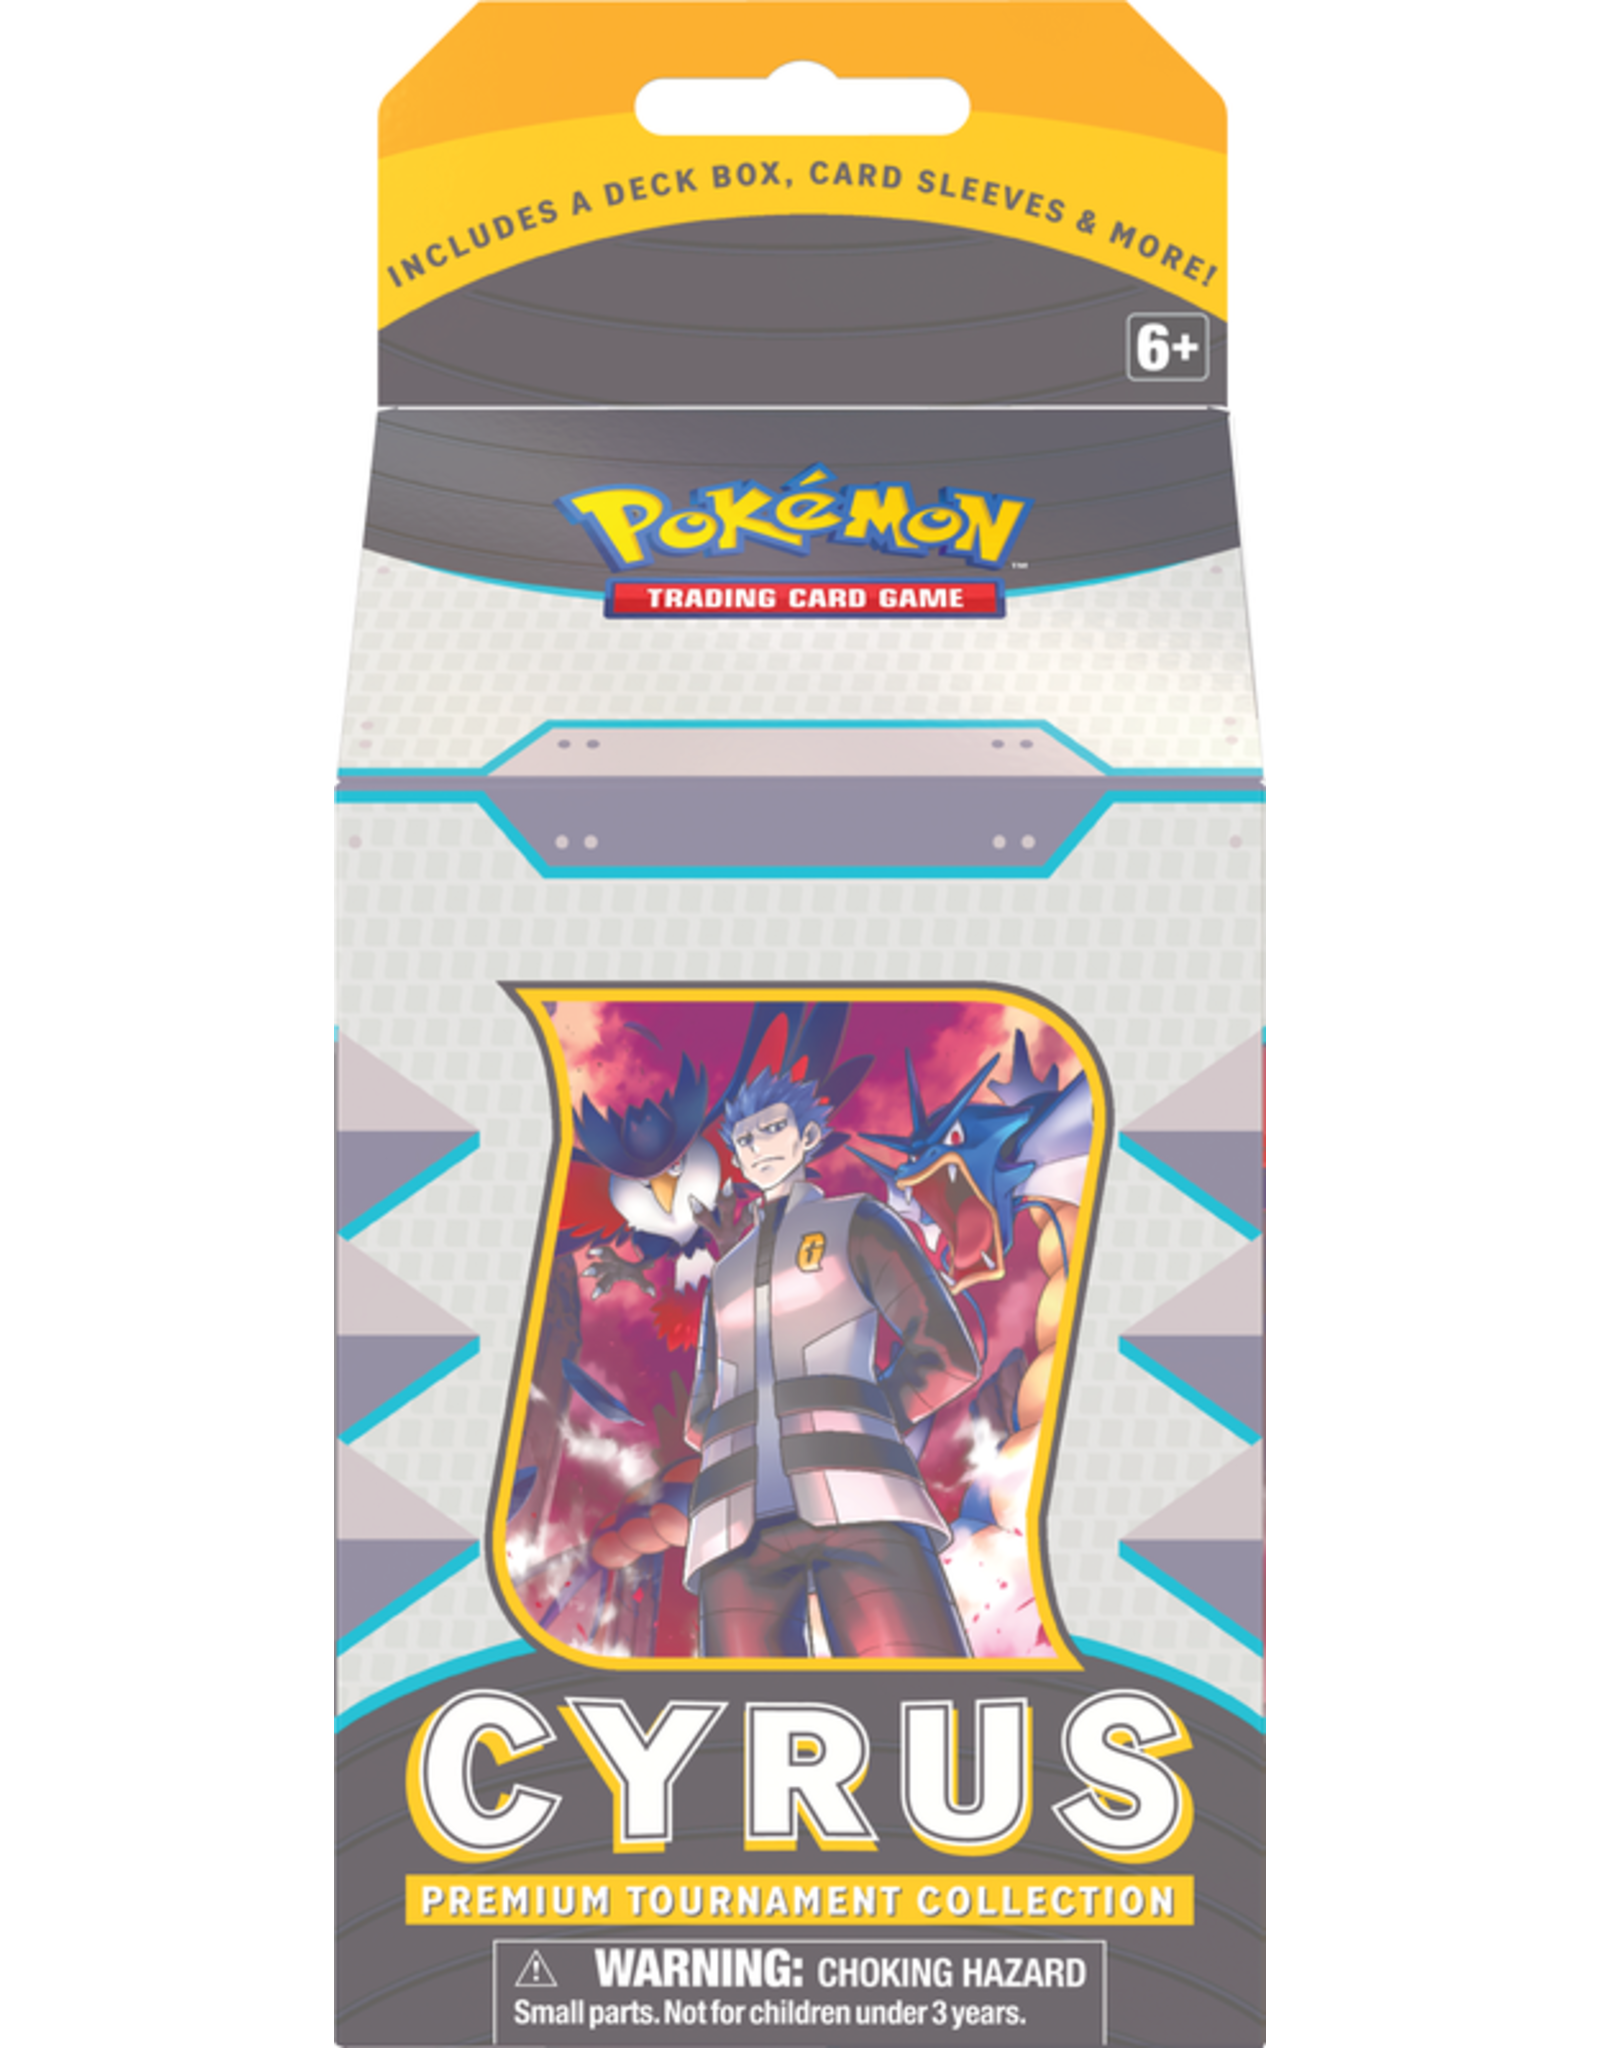 Pokémon Trading Card Game Sleeve Sword and Shield Booster Pack